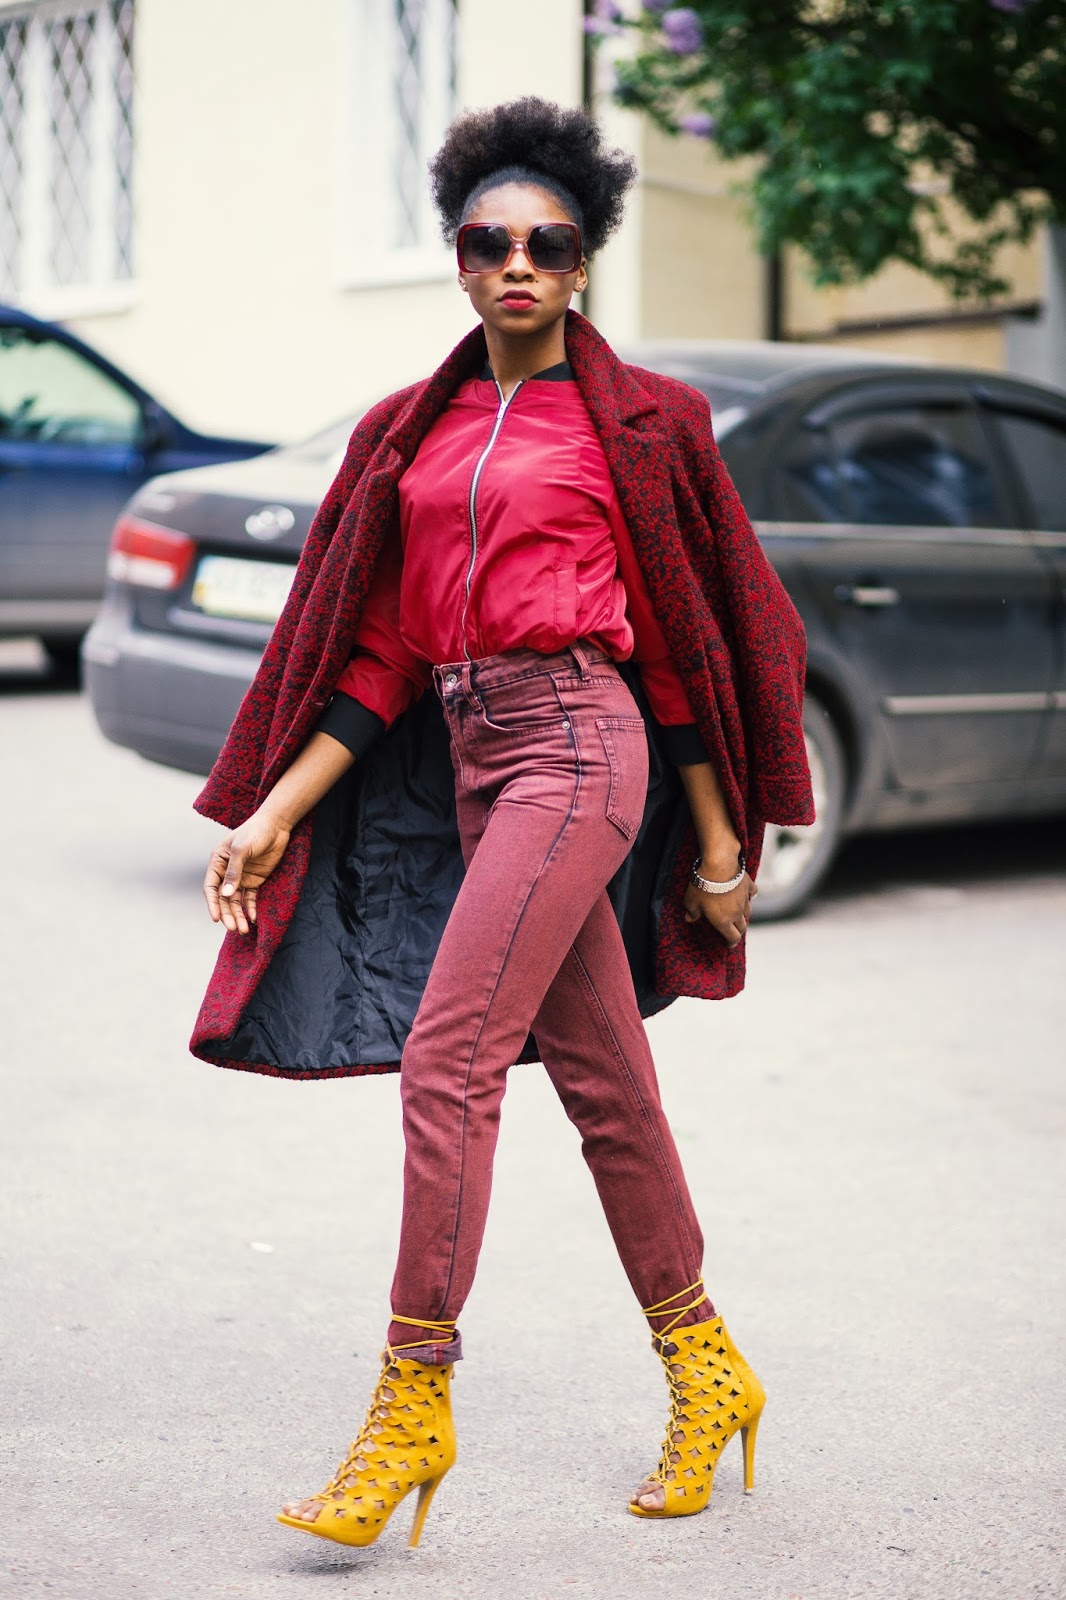 HOW TO STYLE BURGUNDY BOMBER JACKET (SINGLE SHADE OUTFIT) | Melody Jacob